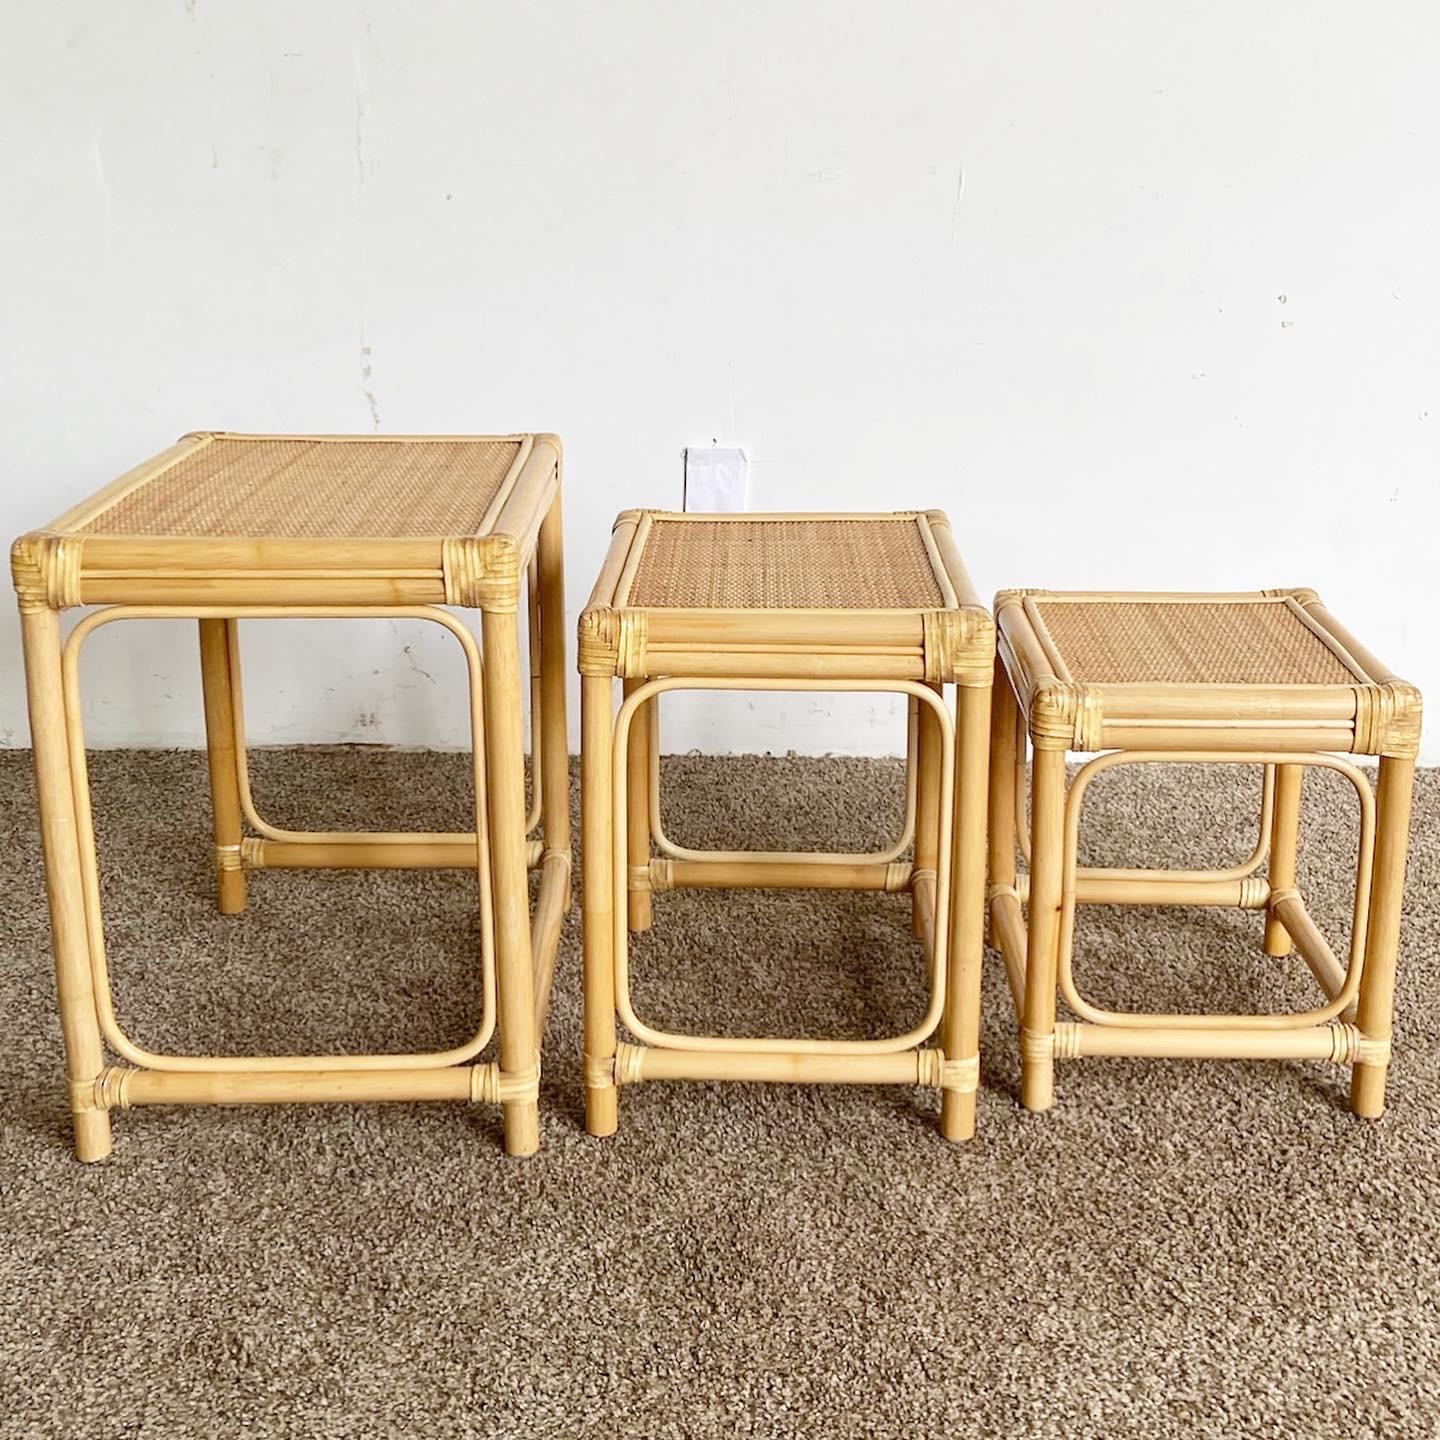 Boho Chic Bamboo Rattan and Wicker Nesting Tables, Set of 3 For Sale 2